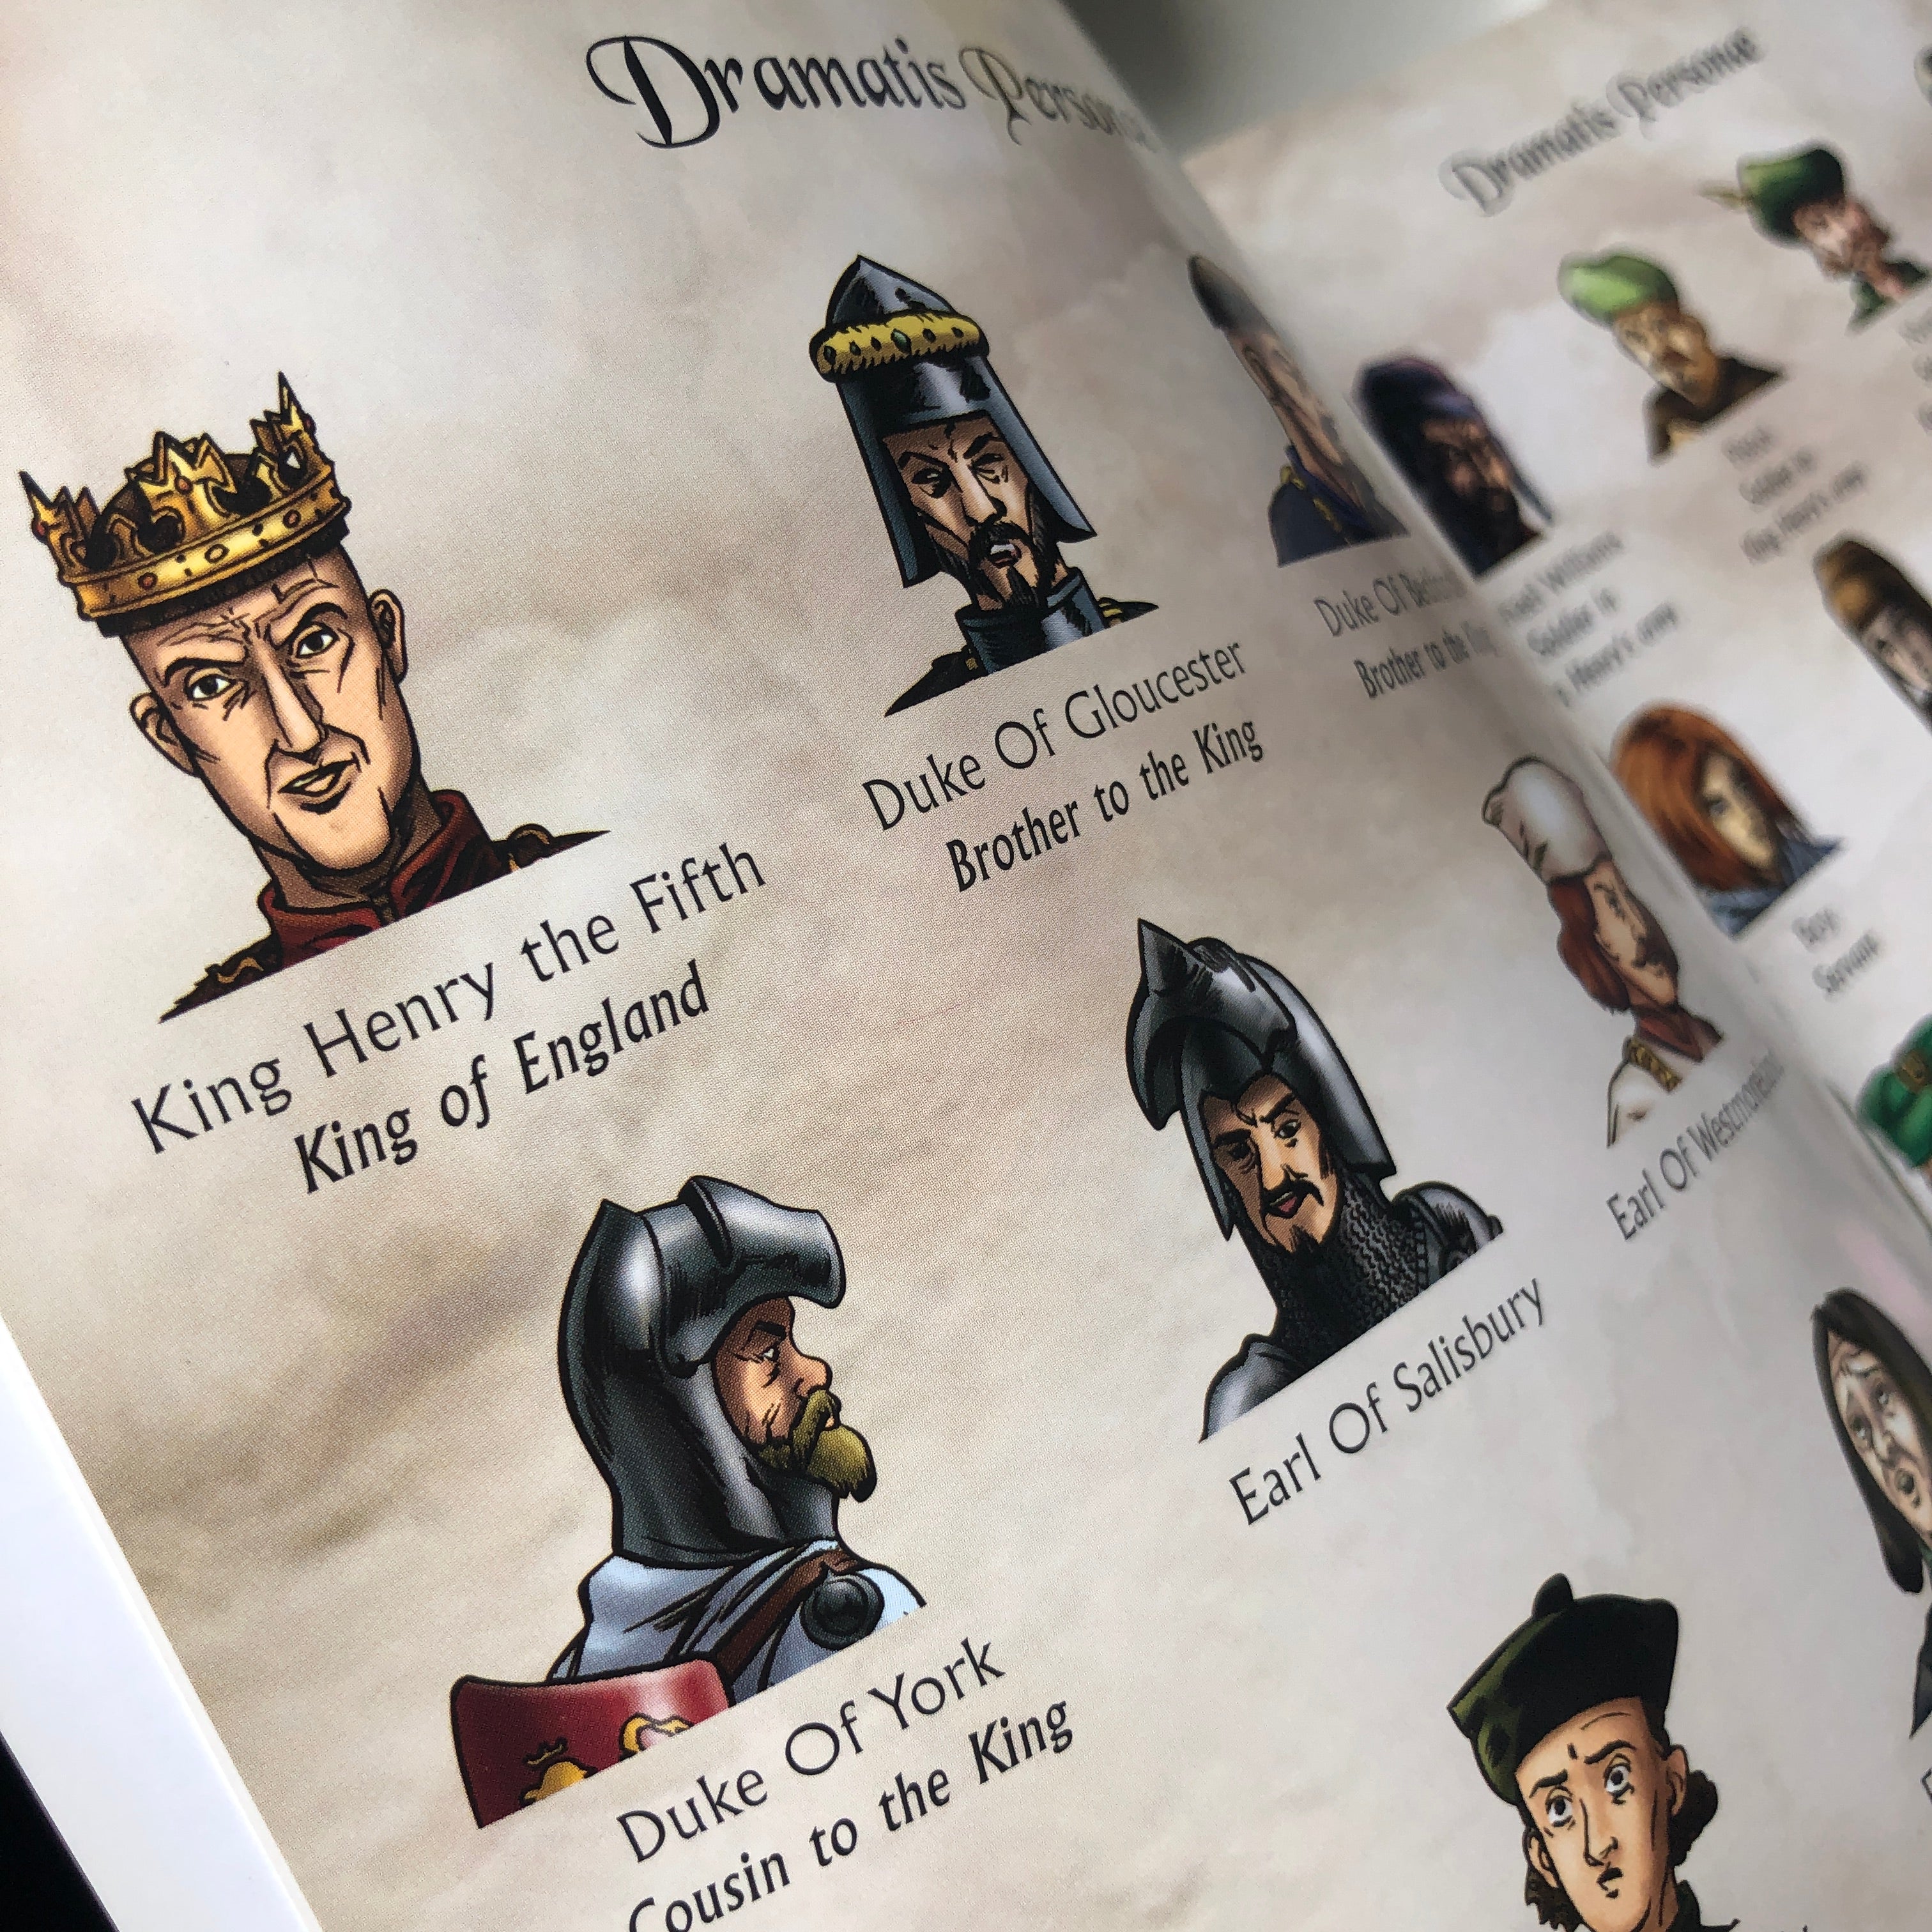 A close up image of the Dramatis Personae showing various characters from Henry the Fifth.